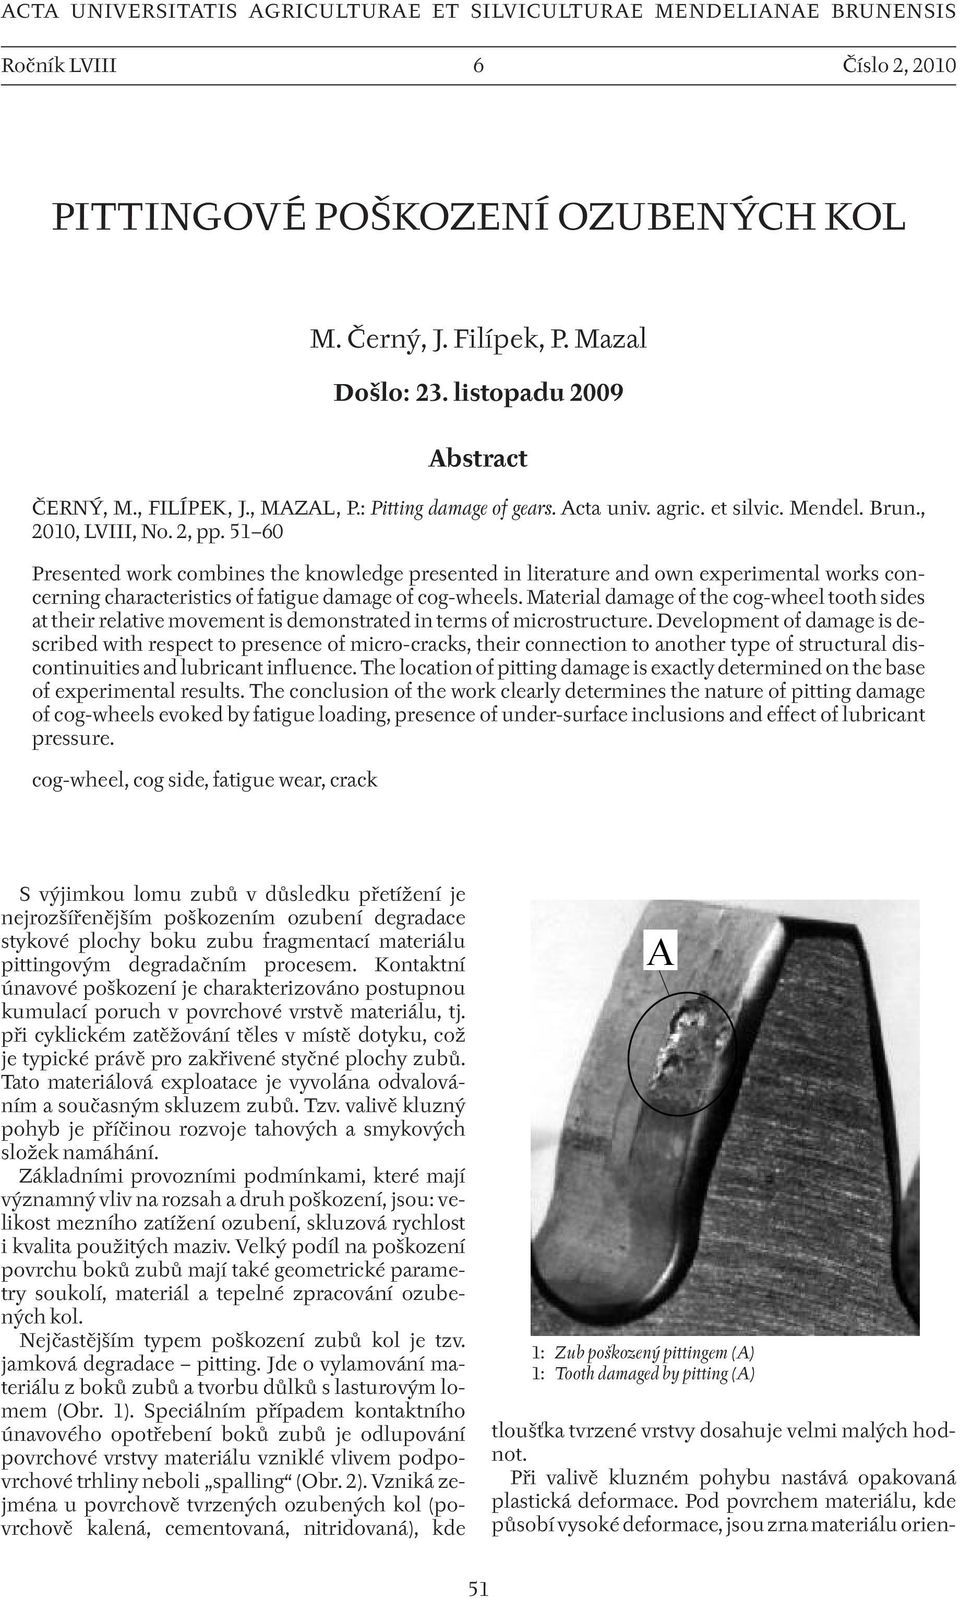 51 60 Presented work combines the knowledge presented in literature and own experimental works concerning characteristics of fatigue damage of cog-wheels.